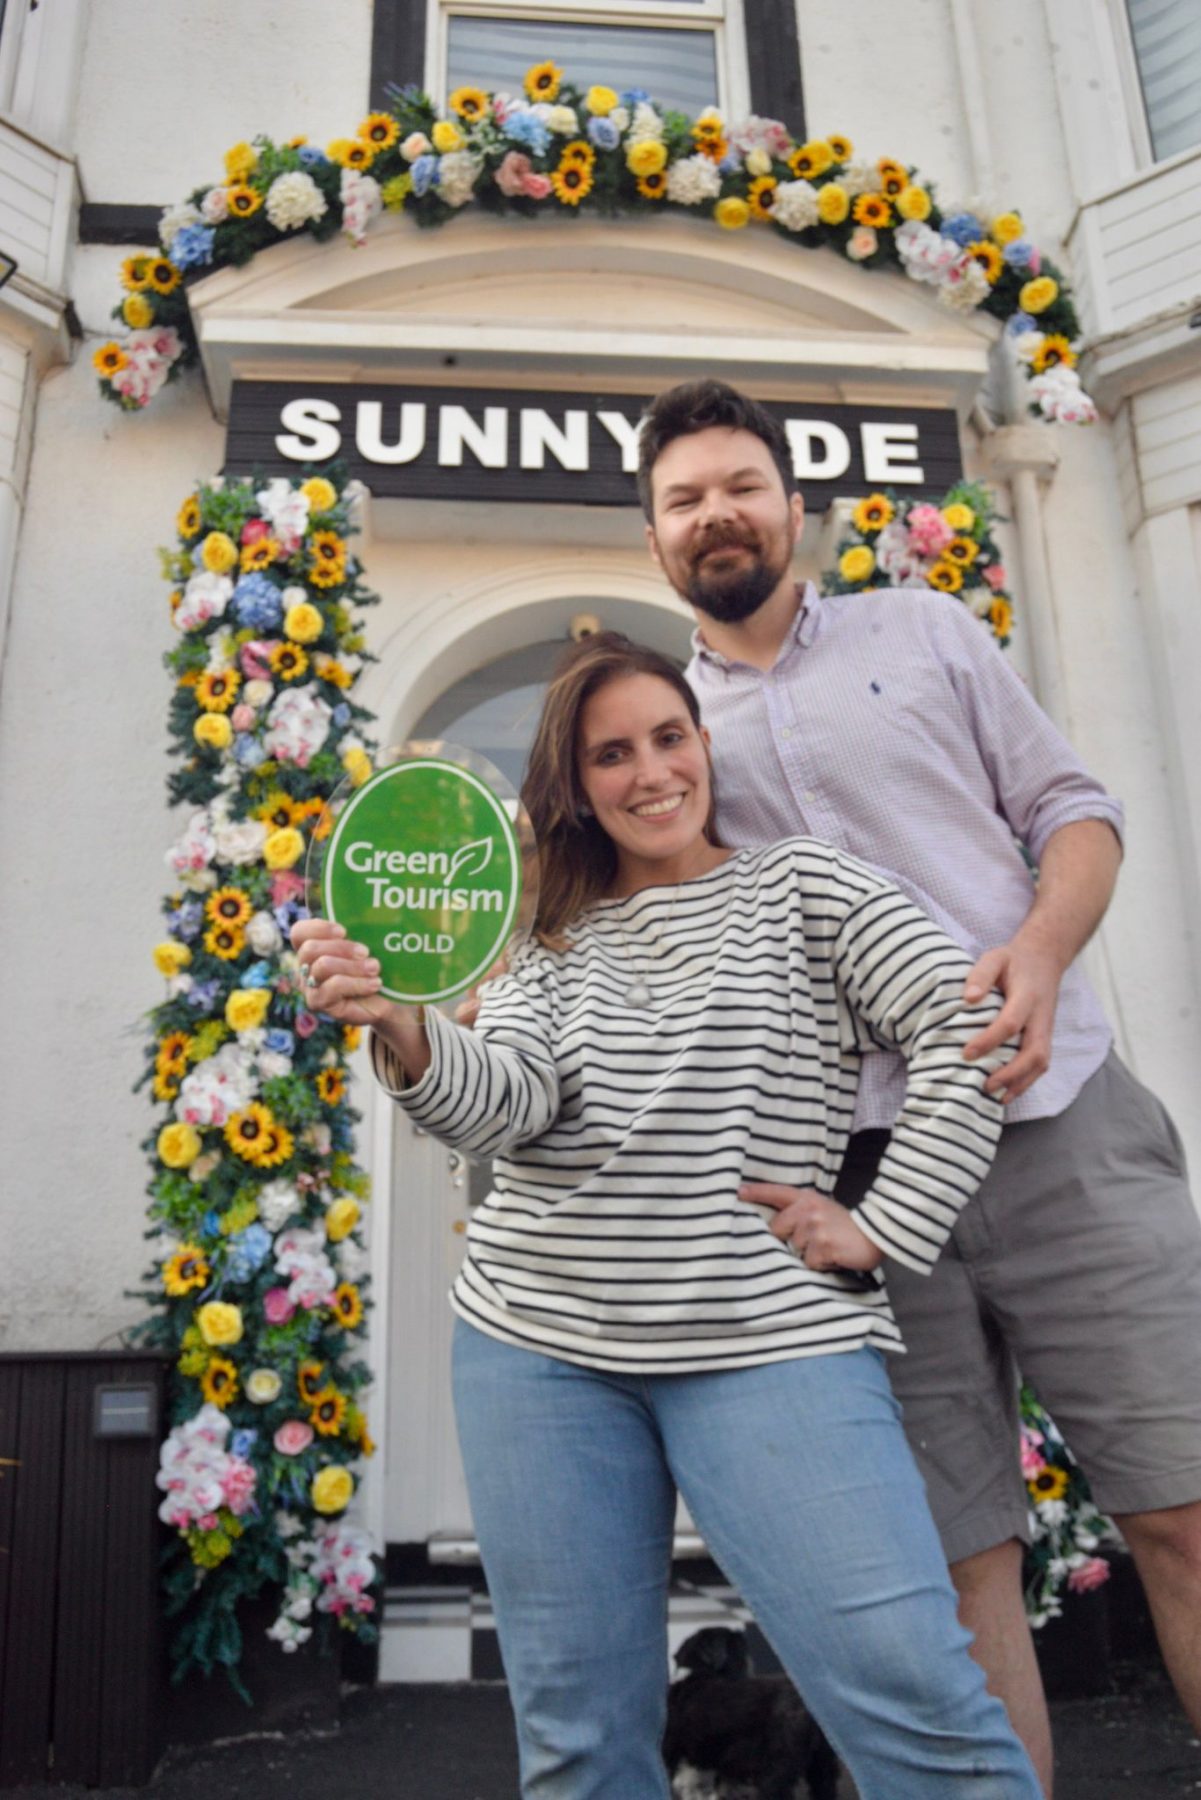 Sunnyside Guest House in Southport is leading the way in the region, after they triumphed in the highly competitive Ethical, Responsible, and Sustainable Tourism Award category at the Liverpool City Region Tourism Awards. They have dedicated the award to their newborn baby, Margo 